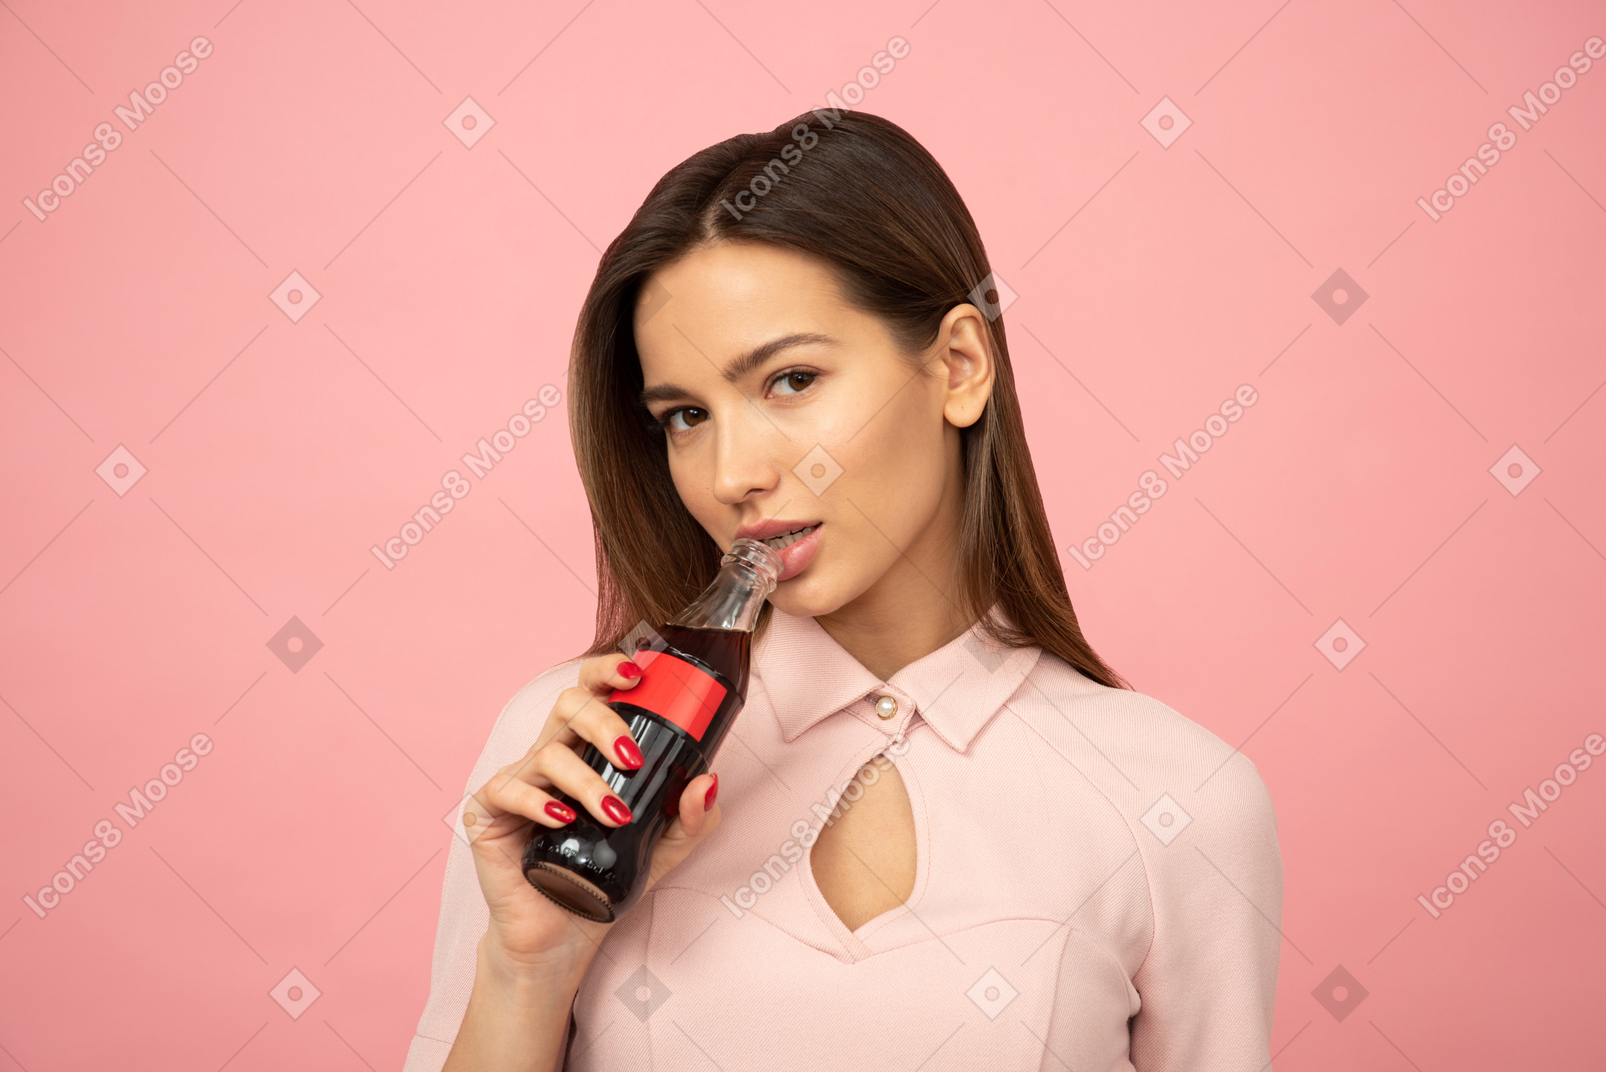 Attractive young girl holding a glass bottle close to her mouth